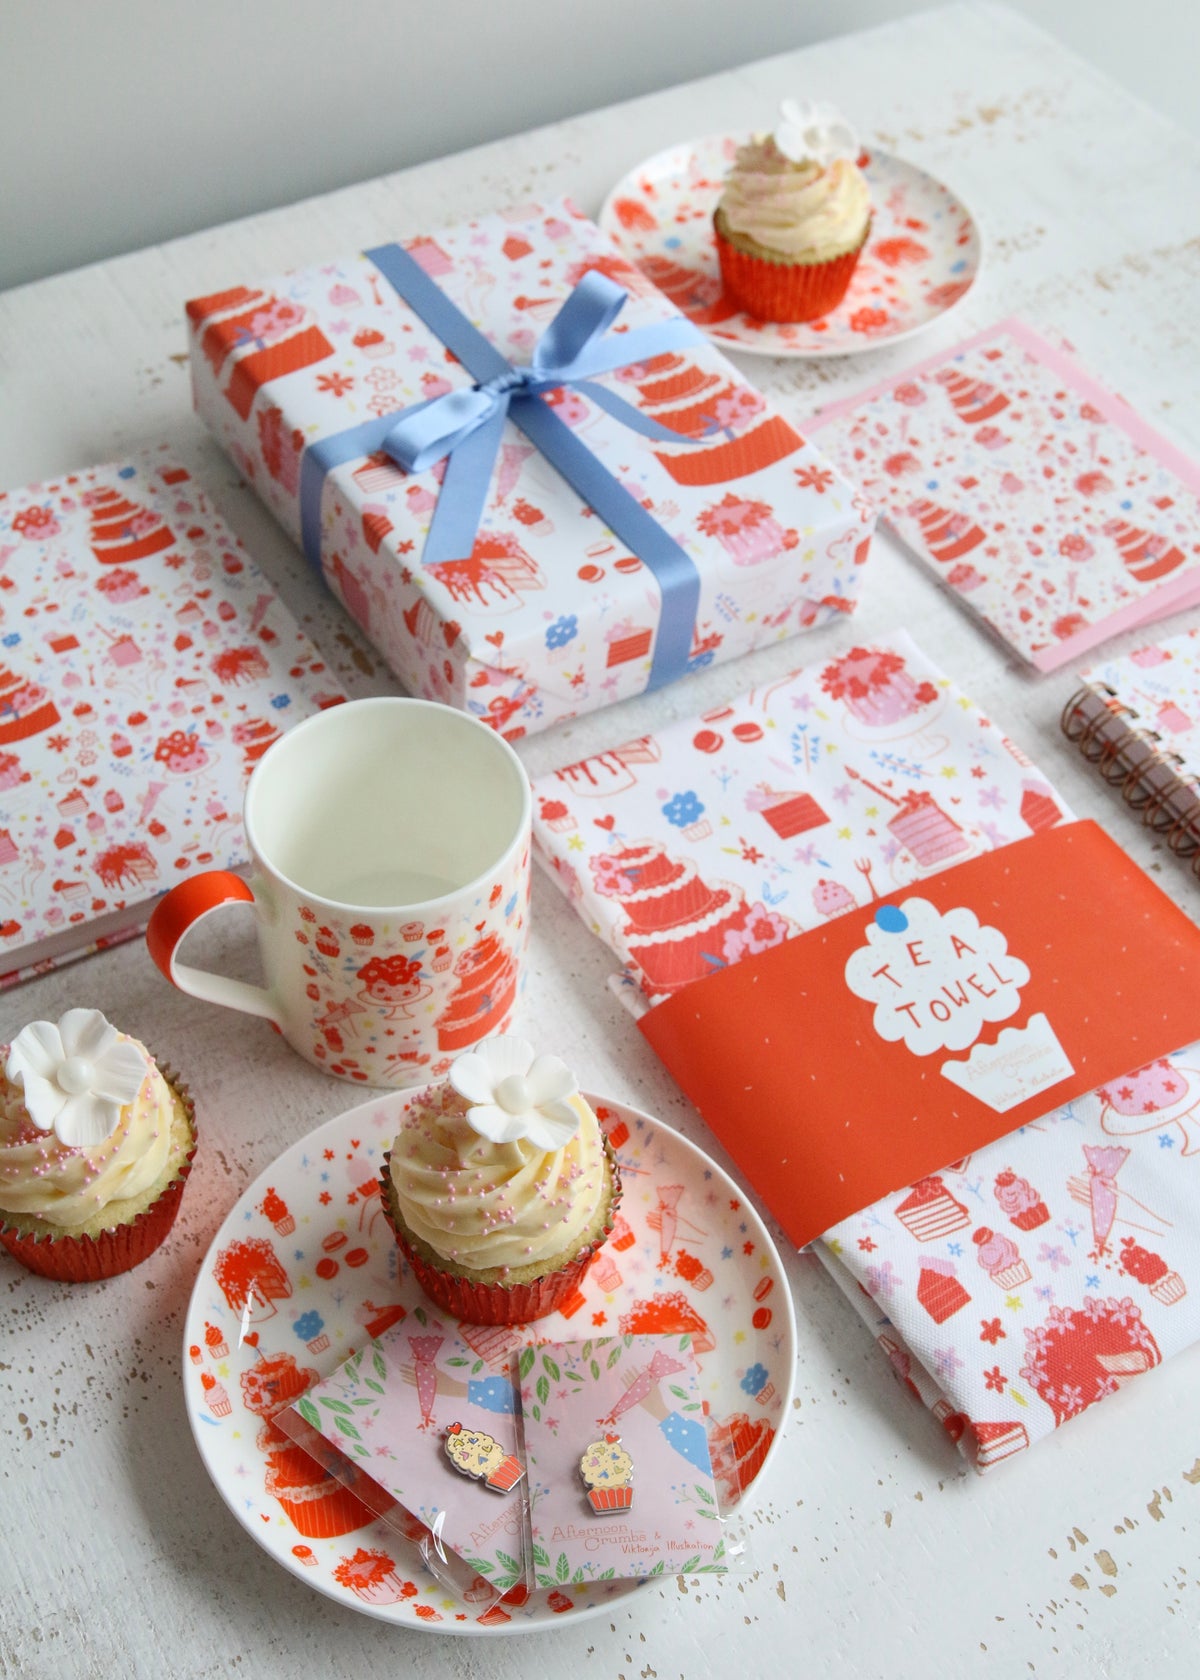 'Spreading Sweetness' Cake & Cupcake Collection of Gifts